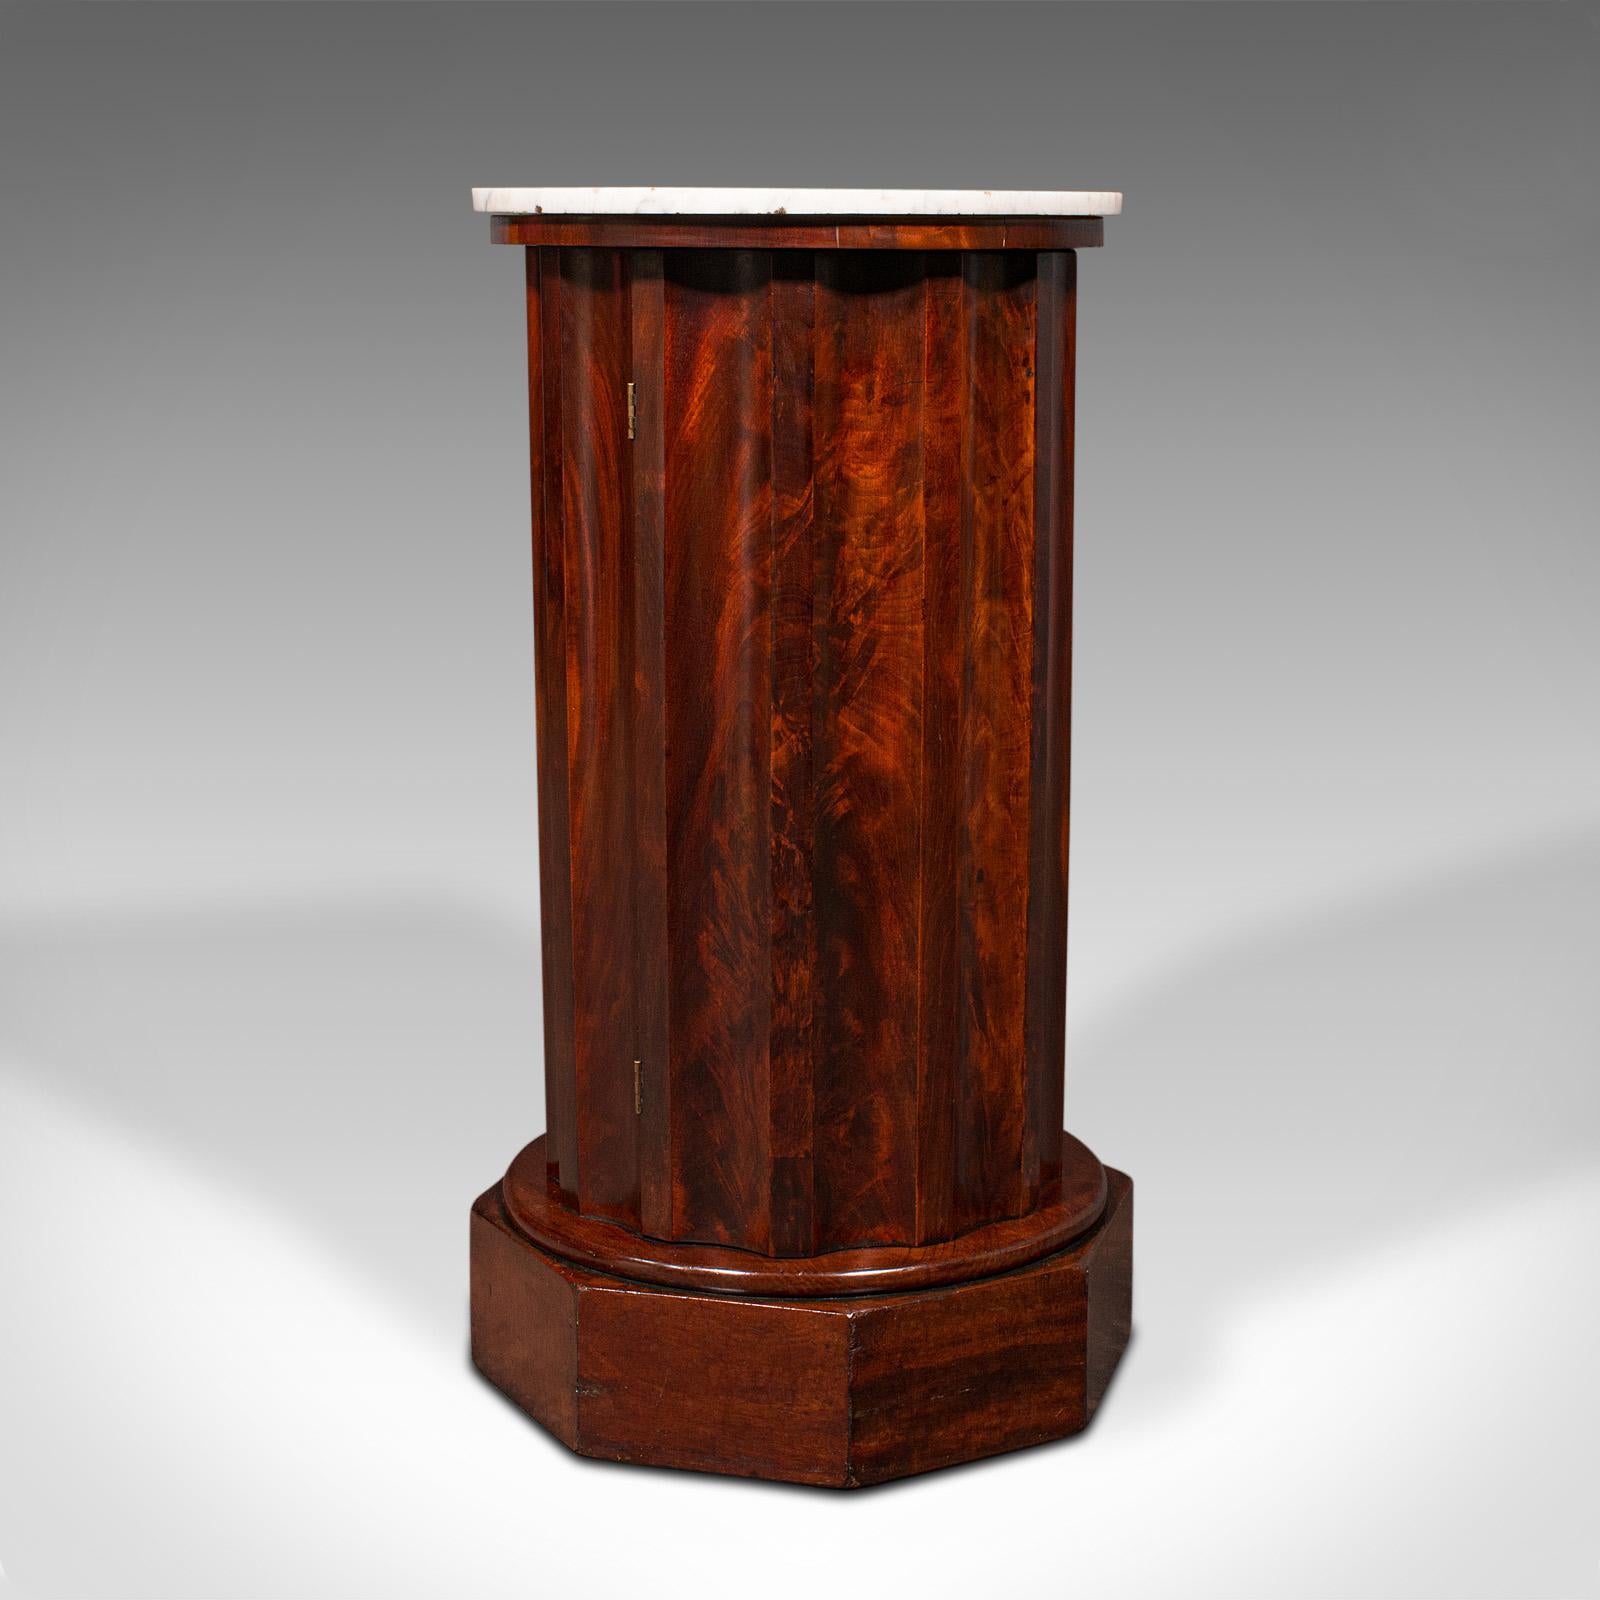 This is an antique pedestal cabinet. An English, flame mahogany and marble nightstand cupboard, dating to the early Victorian period, circa 1850.

Of unusual and fascinating form, a treat for the bedside or lounge
Displays a desirable aged patina